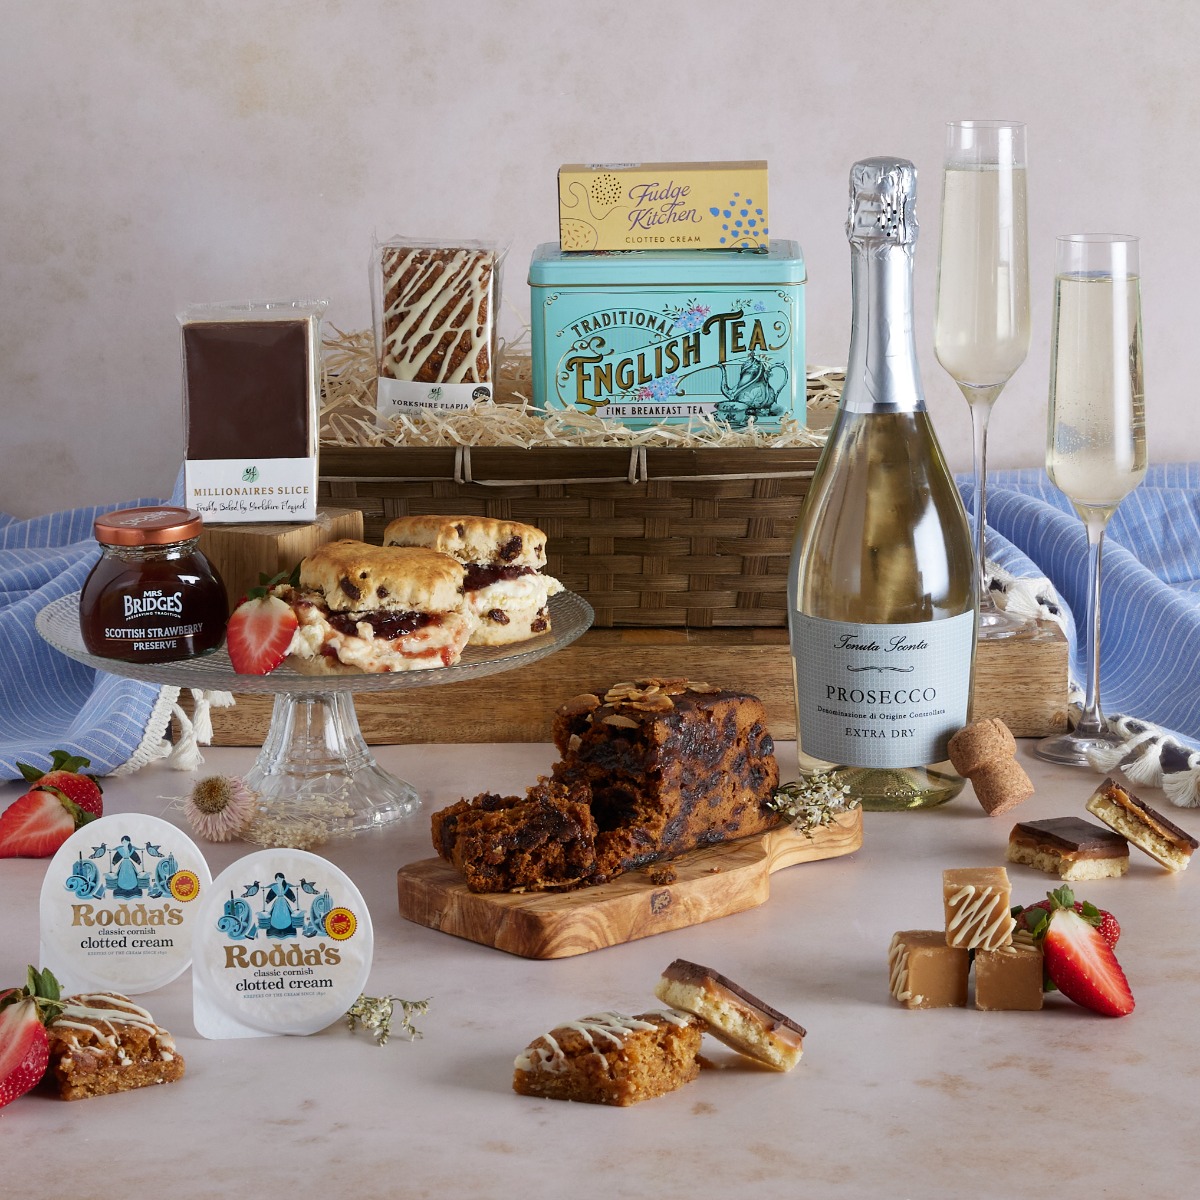 Afternoon Tea with Prosecco Hamper with contents on display - as suggested Valentine's Day Activity